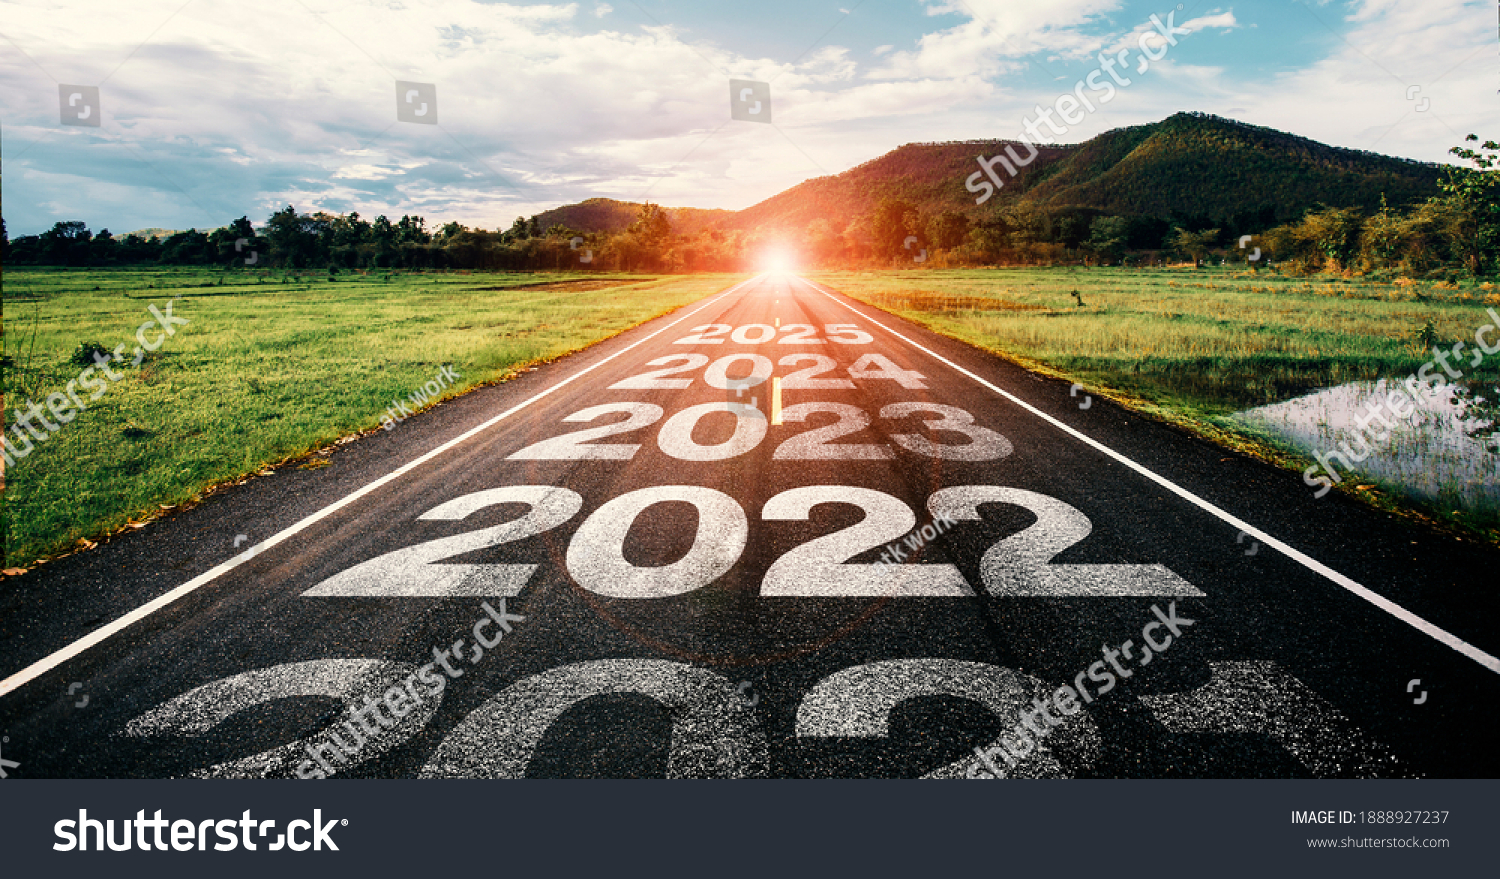 2021-2025 written on highway road in the middle of empty asphalt road and beautiful blue sky. Concept for vision 2021-2025. #1888927237